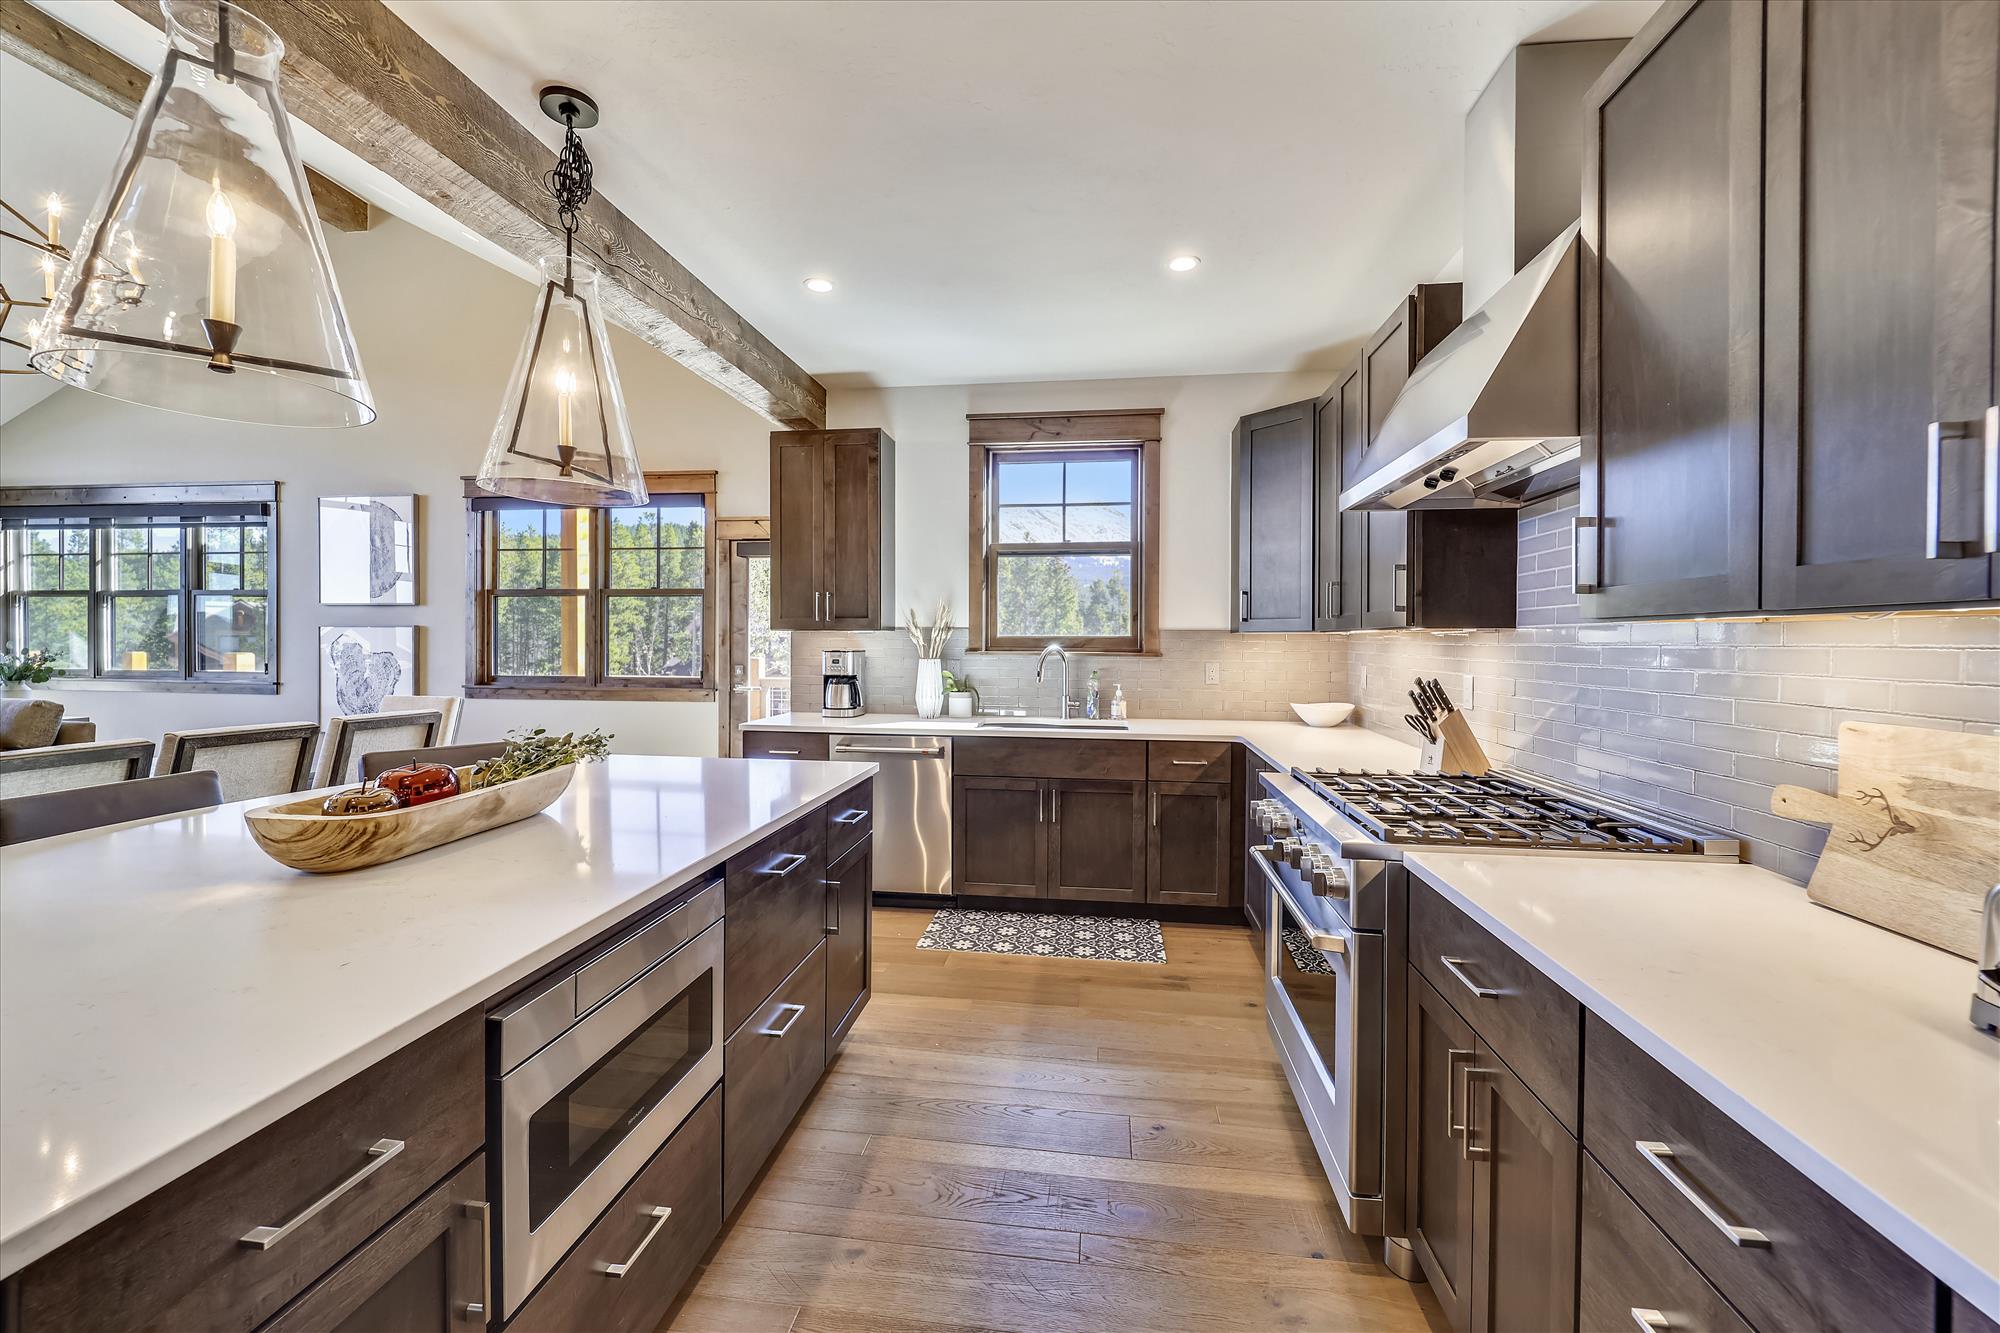 Stainless steel appliances - Cocoa Cabin Breckenridge Vacation Rental